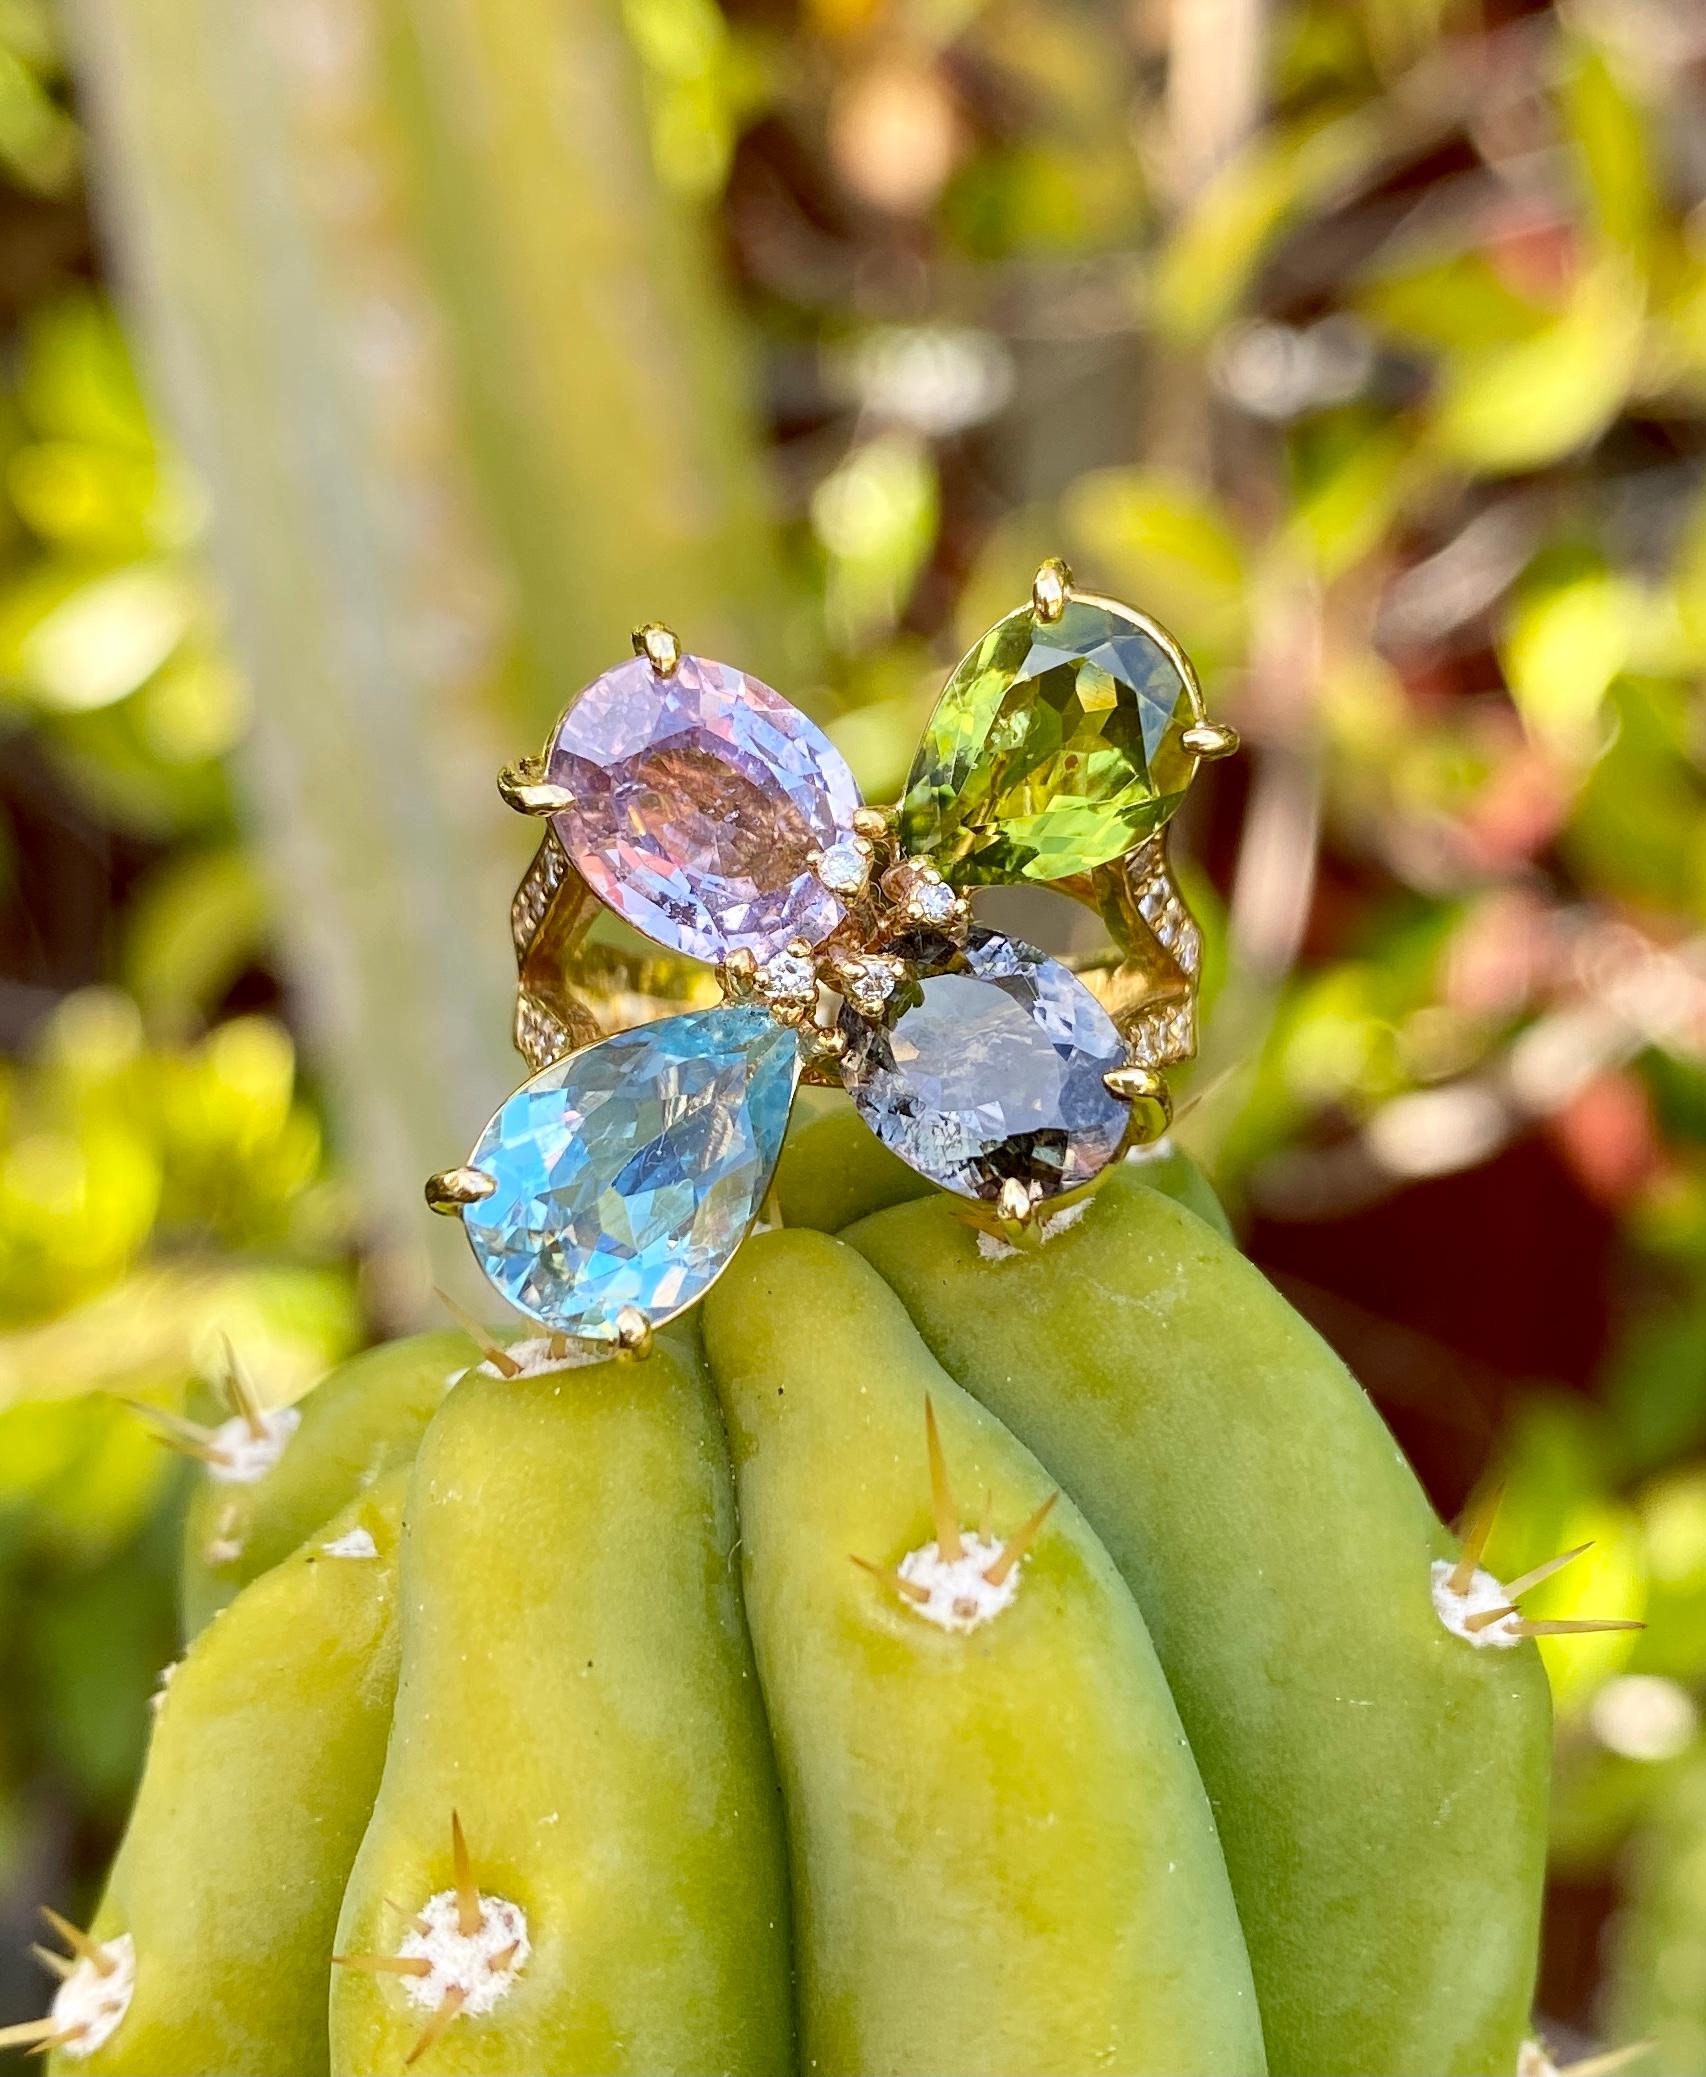 A cluster 4-stone cocktail ring with sapphire, aquamarine, tourmaline, peridot and diamonds, handcrafted in 18 karat yellow gold.

This multigem, one-of-a-kind, asymmetrical cluster ring of sparkling faceted gemstones is very unique and pretty in